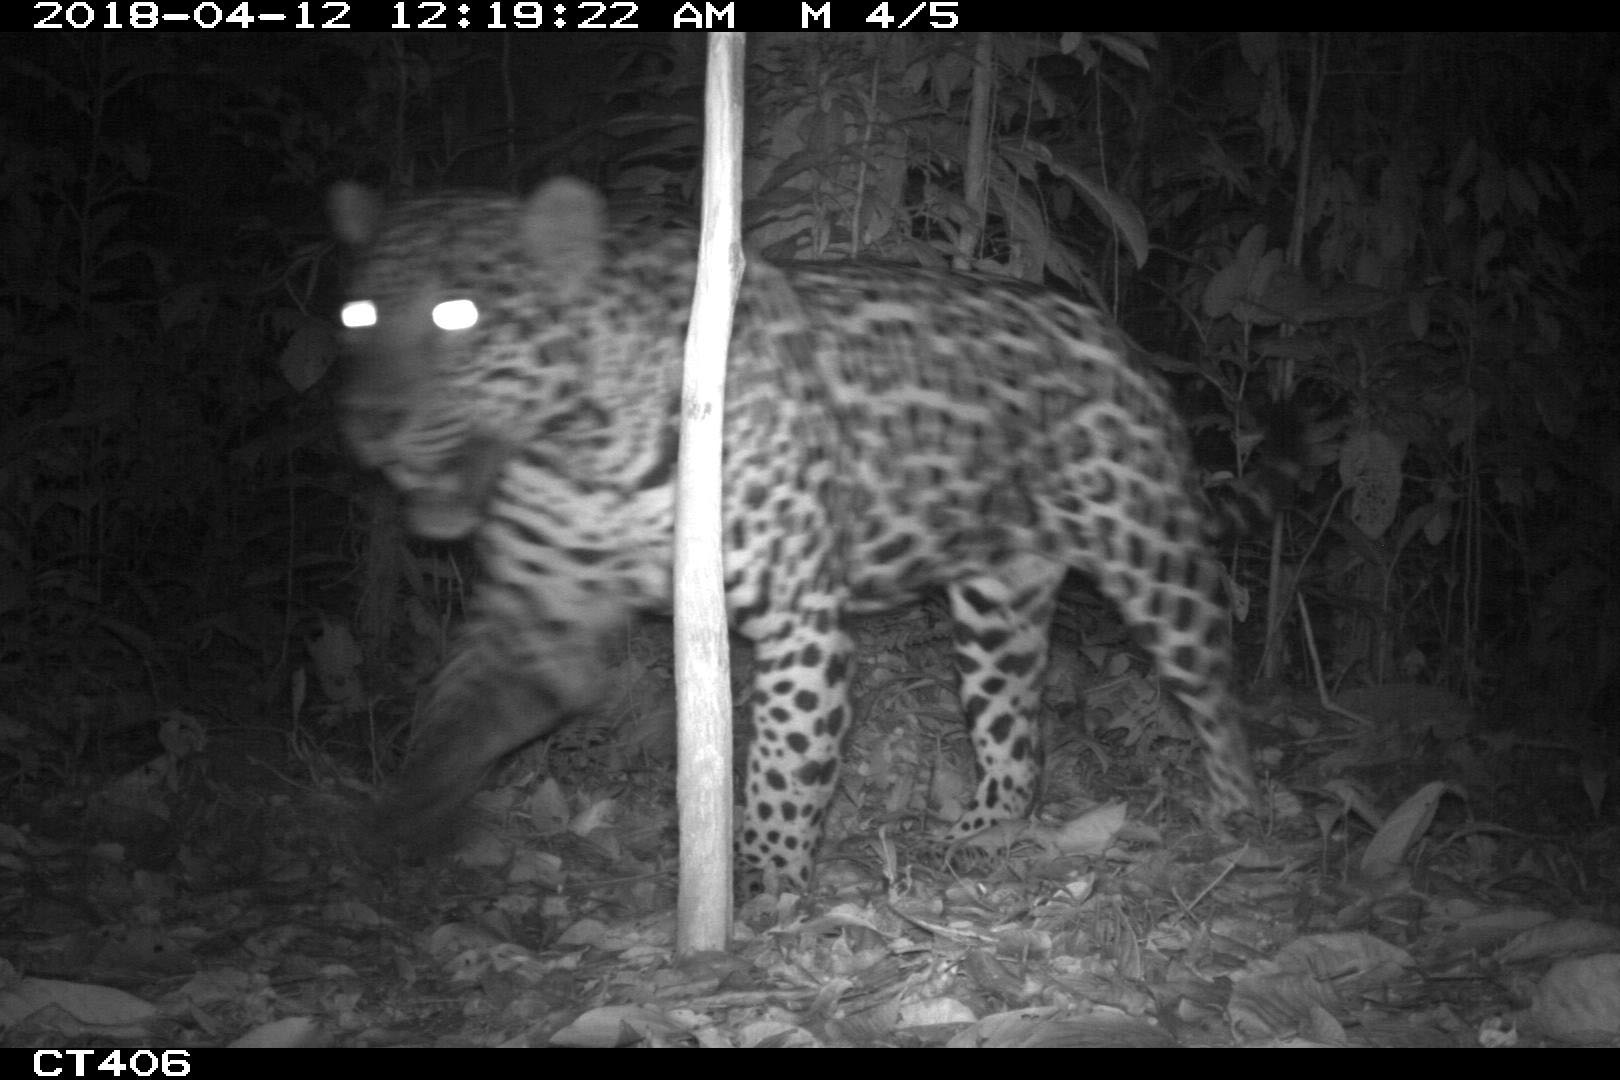 Black-and-white nighttime photo of a jaguar walking in the forest. Its eyes are illuminated by the camera flash.